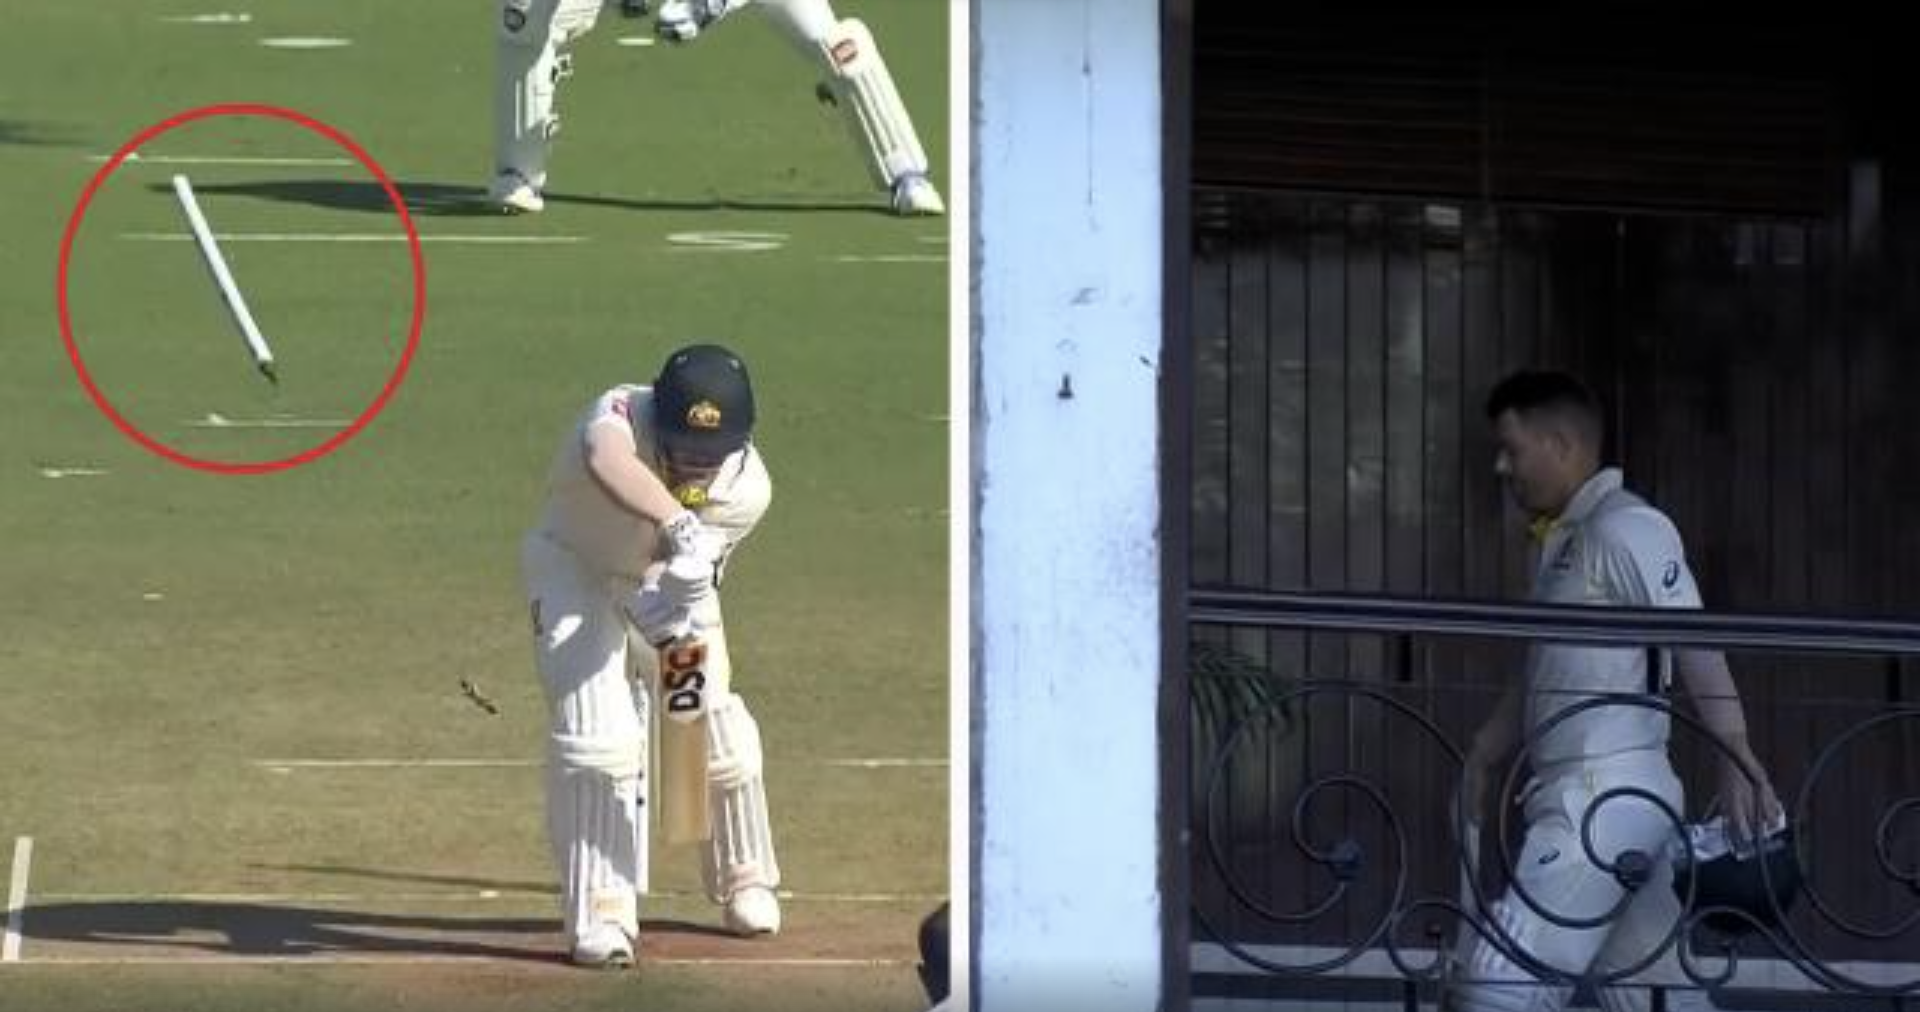 ‘It didn’t look good’: Match referee hands down decision on controversial Jadeja moment.  A debate has erupted after vision of a questionable moment was spotted during the first innings of the first Test between Australia and India. Former Australian Test captain Tim Paine was among those to take note of what Ravindra Jadeja was doing ahead of one of his overs.   With Alex Carey and Peter Handscomb at the crease and the Aussies at 120-5, Jadeja came in for his 16th over already sitting with figures of 3-30.   The TV broadcast captured Jadeja appearing to either take something off the hand of one of his teammates, or from inside his hand, with his right hand. He then rubbed his hands and finger near and around the ball though it was uncertain what exactly was happening - some suggesting he was putting something on his spinning finger.  When footage of the moment was shared with Paine on Twitter, he replied: “Interesting.”  “What is it he is putting on his spinning finger? Never ever seen this,” England great Michael Vaughan tweeted.  Jadeja finished with figures of 5-47 as the Australians were bowled out for 177, with India 1-77 at stumps at the conclusion of day one.  According to ESPNcricinfo, Jadeja and India captain Rohit Sharma were shown a video of the incident by ICC match referee Andy Pycroft after play, but no charges were laid against the player.   Indian team management reportedly told Pycroft Jadeja “was applying pain-relief cream to the index finger of his bowling hand”.   “While the incident triggered debates on social and mainstream media, it is learned that the Australia team had not brought the matter to the attention of the match referee,” the report said. “According to the playing conditions, the match referee can independently probe such incidents without needing a complaint to be lodged.   And under the Laws of Cricket, the bowler needs the umpire’s permission to apply any sort of substance on their hands to ensure the condition of the ball remains unaffected.” Australia great Brad Haddin said on Fox Cricket before day two that “it didn’t look good, the first time we seen it.”   Former Australian skipper Michael Clarke said he did not believe there was anything sinister in the incident but said Jadeja should not have applied the cream while he had the ball in hand. “He’s bowling so much so he’s probably got a blister or cut on that finger.   What he should have done there, he should have given the ball to the umpire and stand in front of the umpire while he was putting it on his finger,” Clarke said on the Big Sports Breakfast. “I don’t look at that and think it’s a thing.   “I just wish he didn’t have the ball in his hand. “If he chucks the ball to the umpire and does that I don’t think there’s any comment made about that. It’s just the perception. “I don’t think there’s anything to it. I could be 100 per cent wrong.”